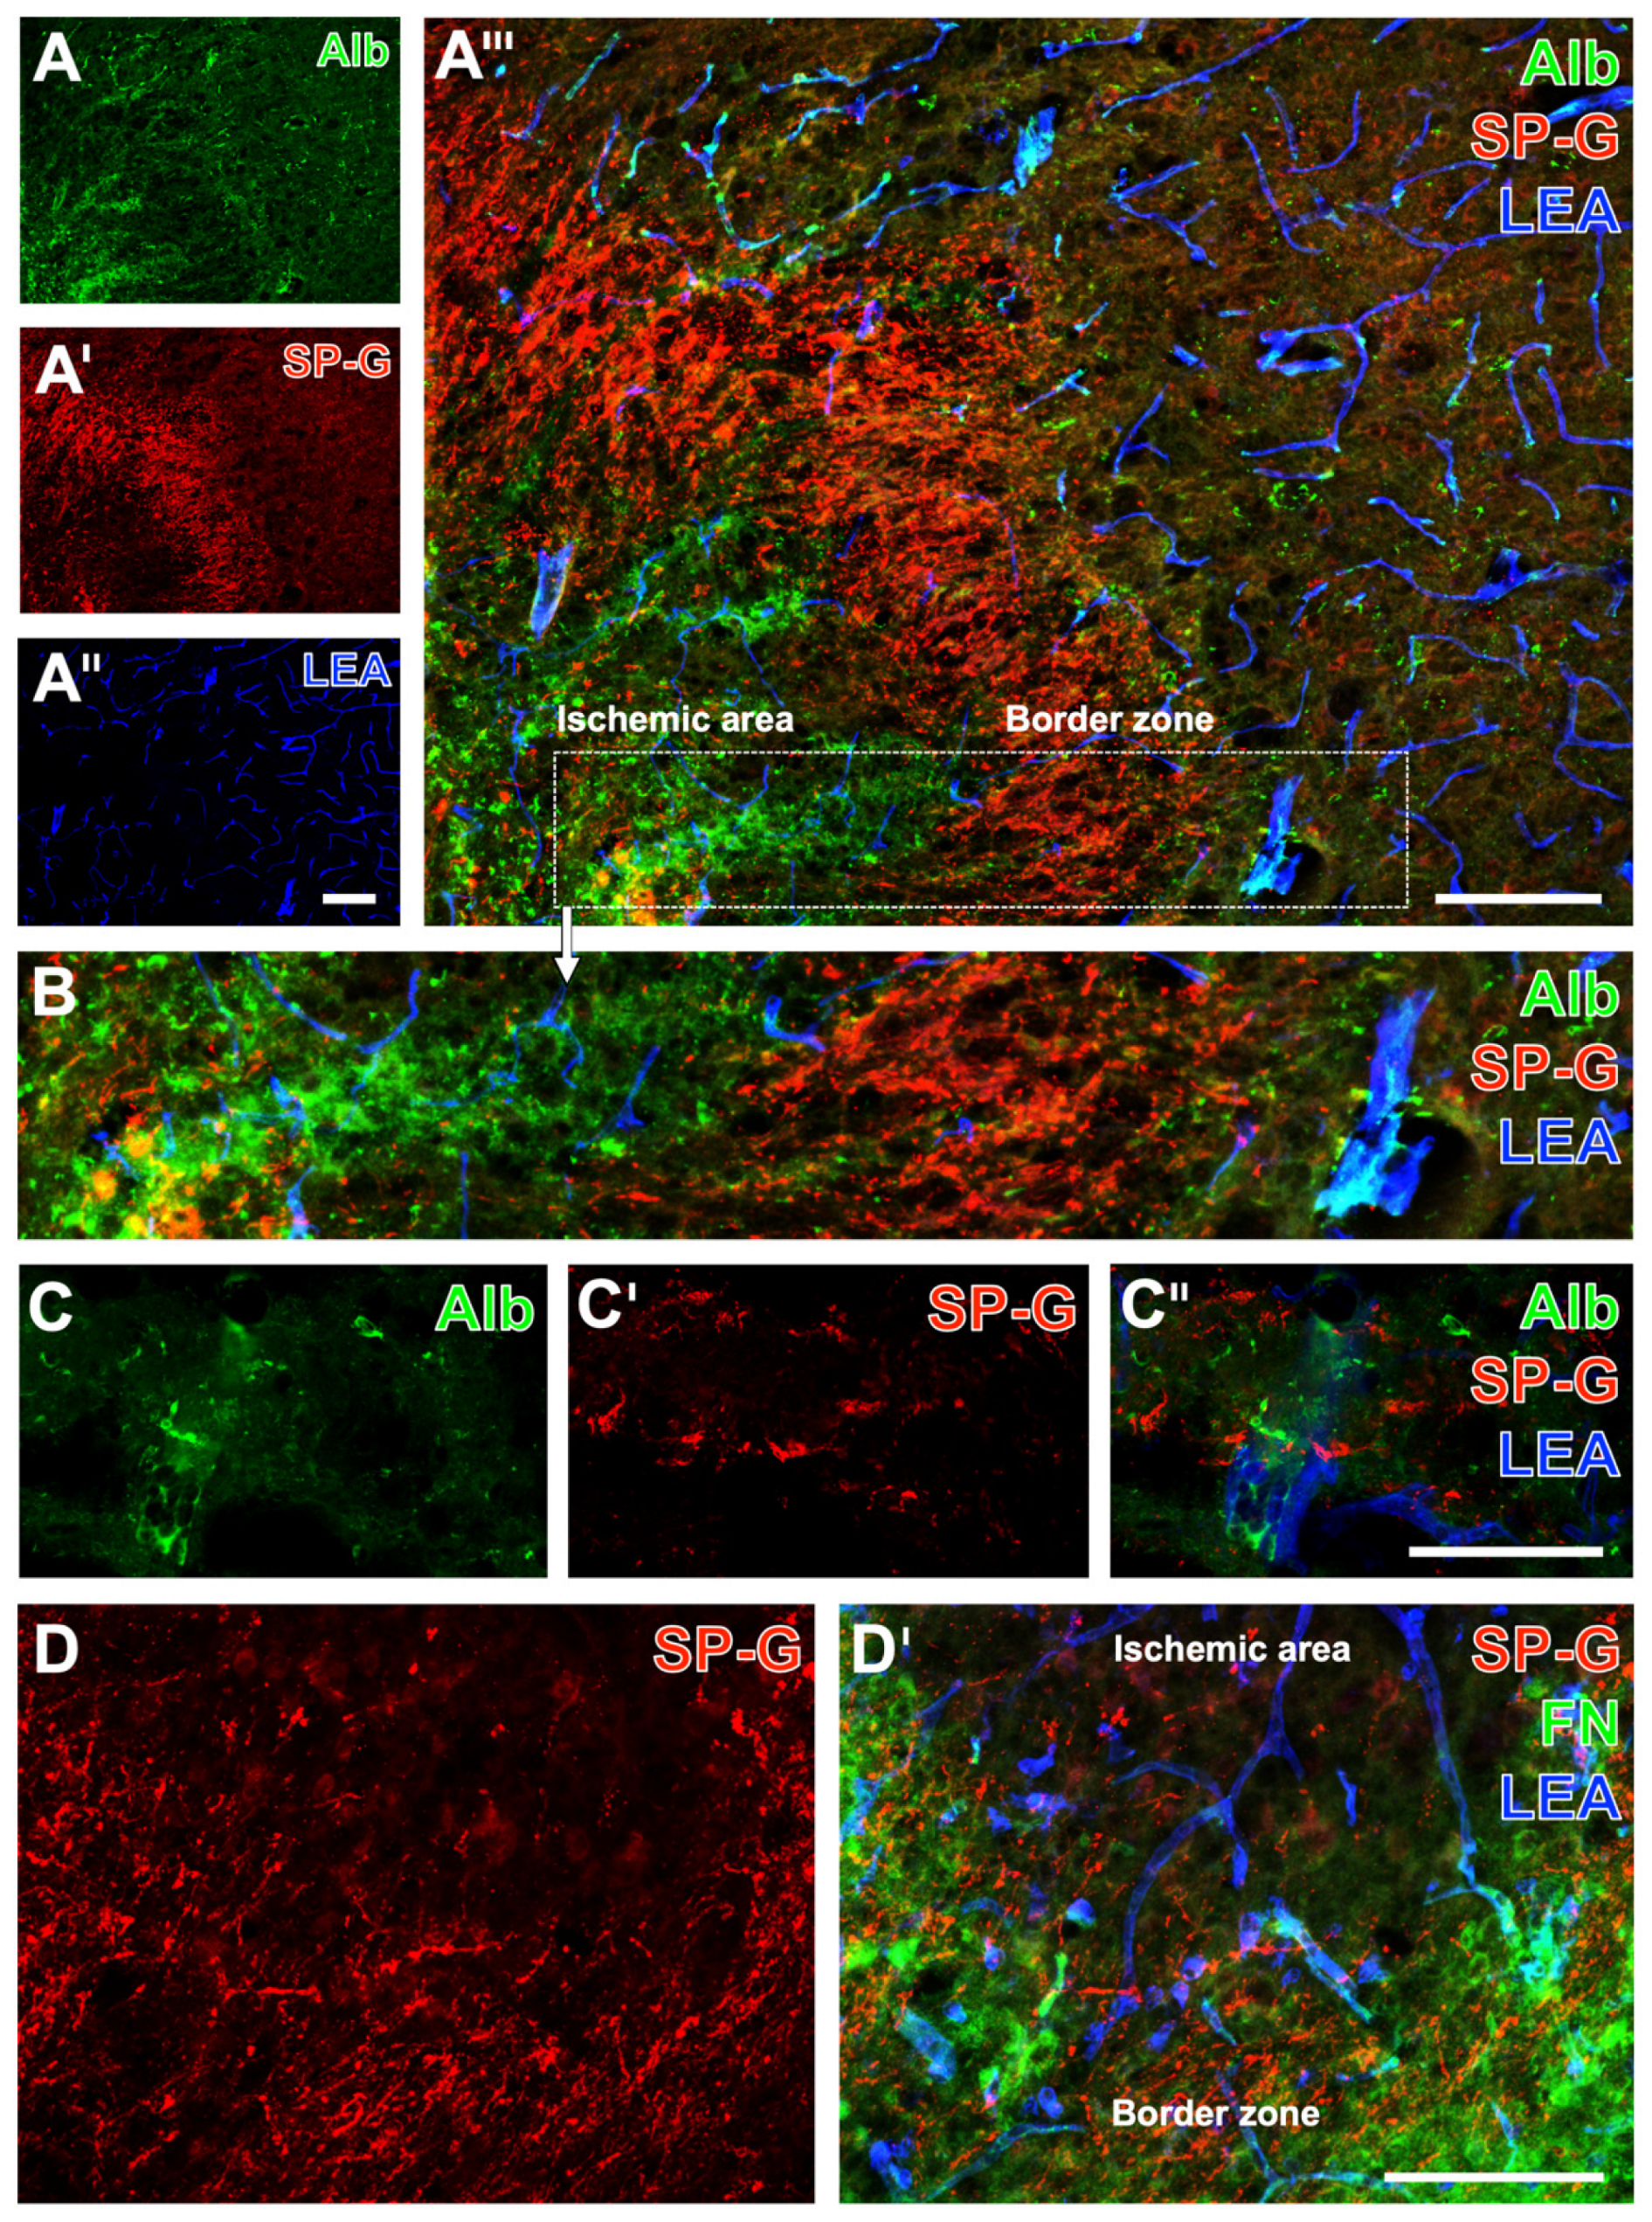 IJMS | Free Full-Text | Regionally Altered Immunosignals of Surfactant  Protein-G, Vascular and Non-Vascular Elements of the Neurovascular Unit  after Experimental Focal Cerebral Ischemia in Mice, Rats, and Sheep